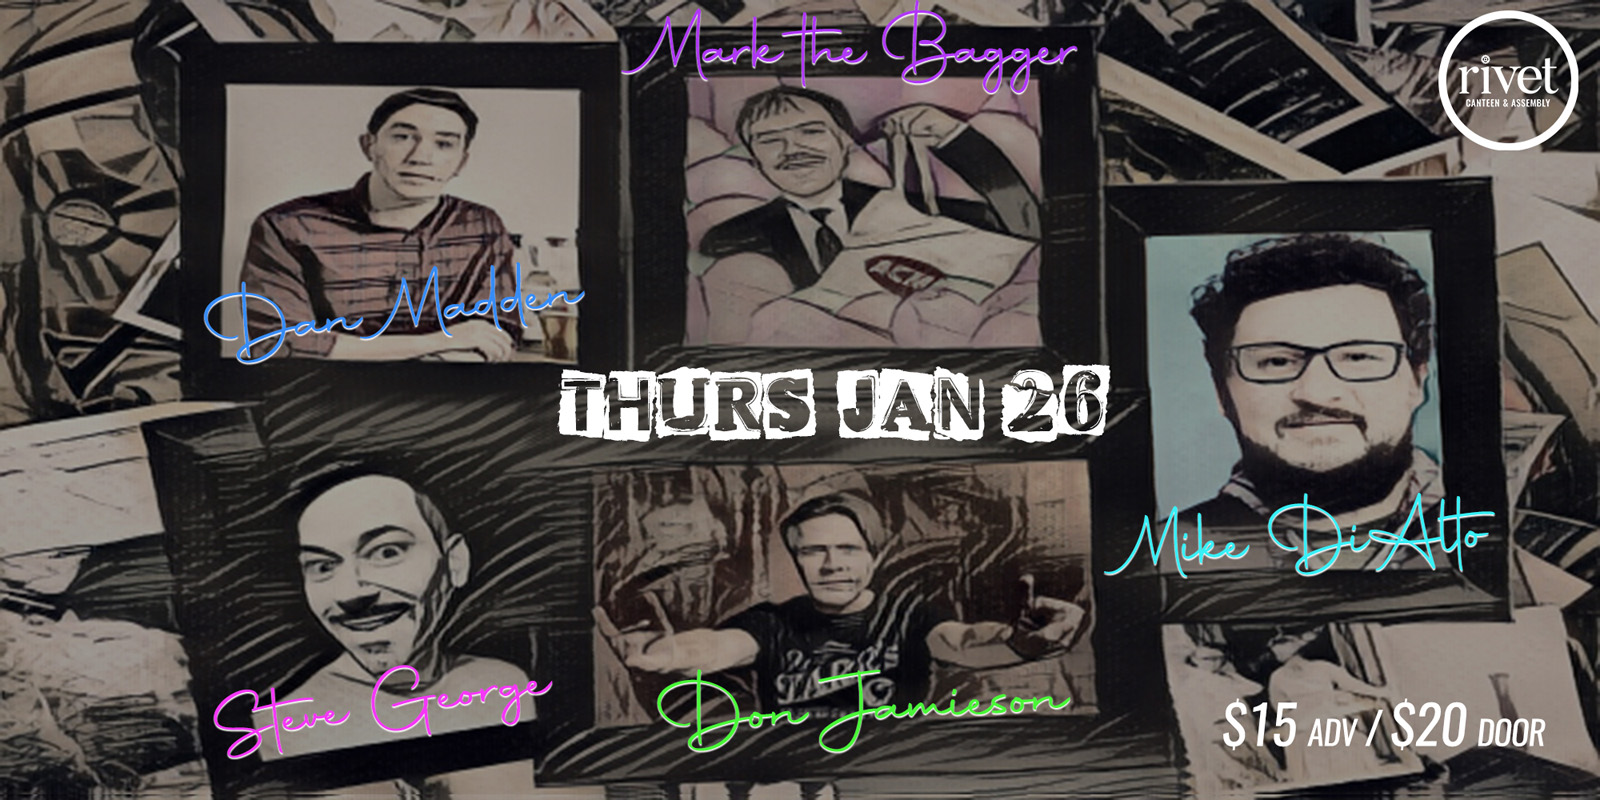 The Rivet Monthly Comedy Series continues with amazing comics and a rock-n-roll cause! Don Jamieson is back with a real cast of characters for this one: Mark 'The Bagger', Dan Madden, Steve George and Mike DiAlto! Thursday, January 26th, 2023. Be there!